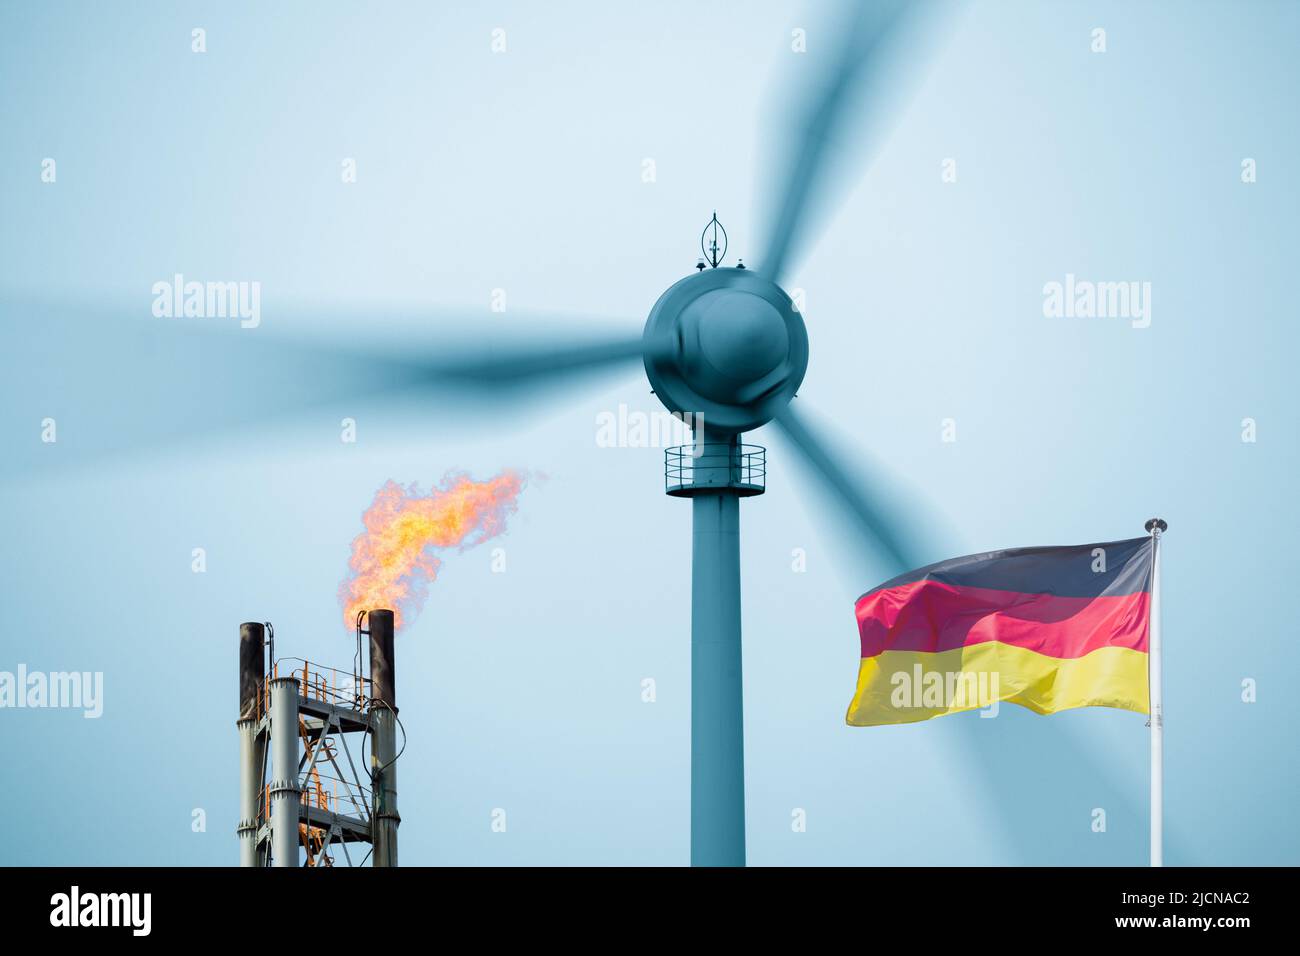 Renewable energy, gas, fossil fuels, Russian gas, wind turbine, global warming, climate change, Germany... concept Stock Photo